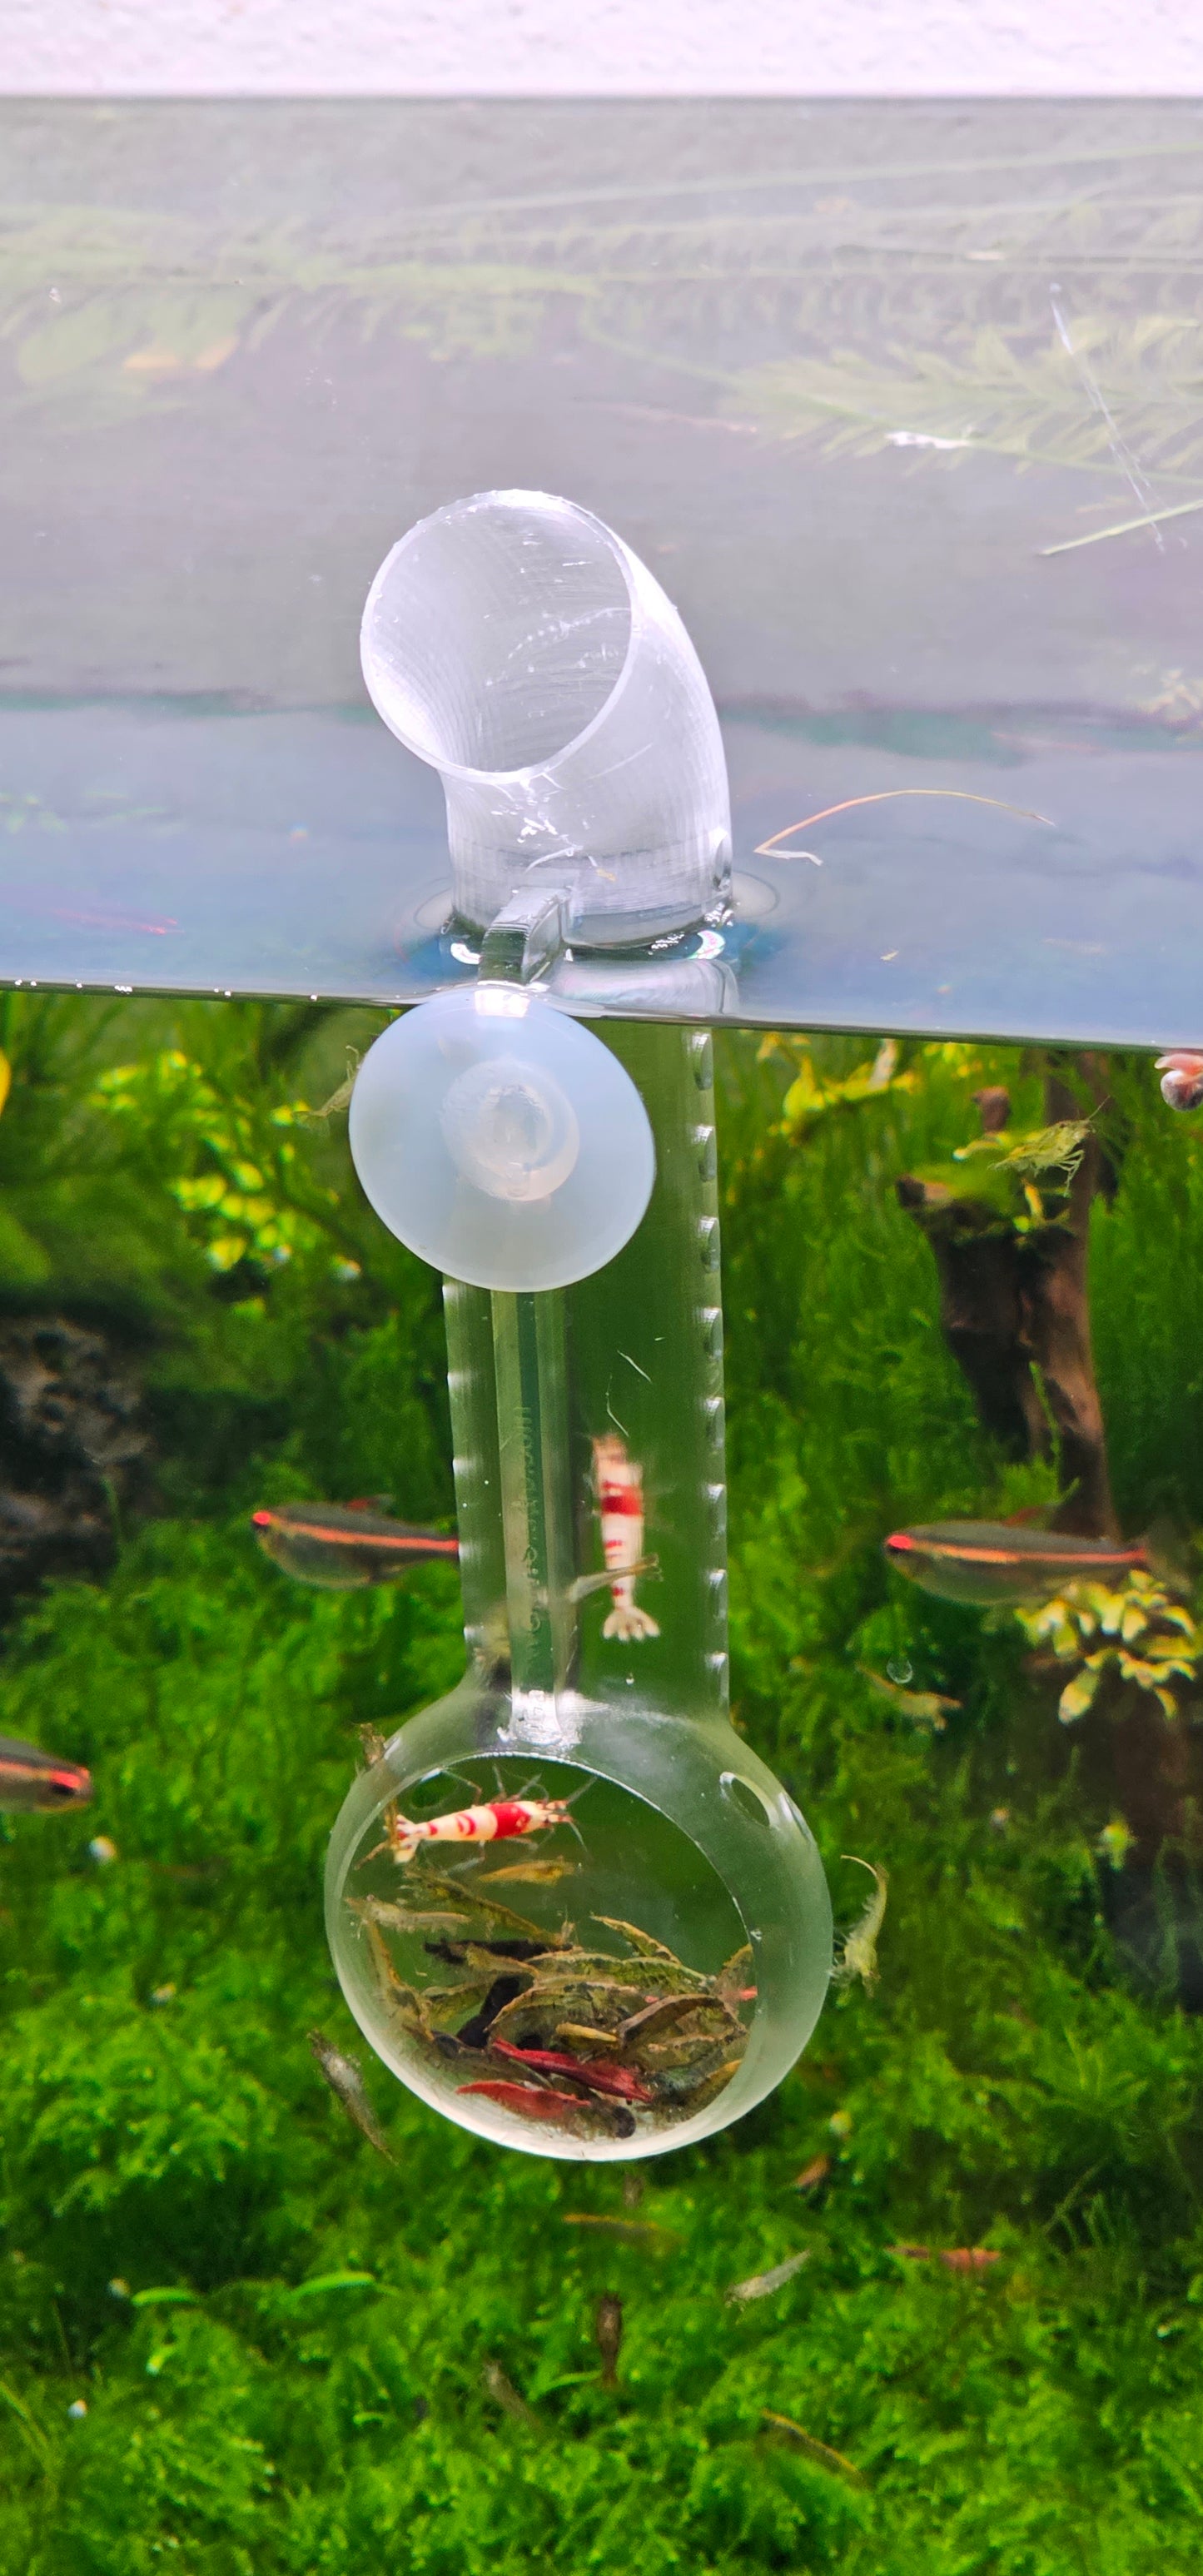 Shrimp Feeder and Viewing Platform - For Shrimp feeding, viewing, study, & photography! Clear Version - Glass like! - 3D Printed Plastic